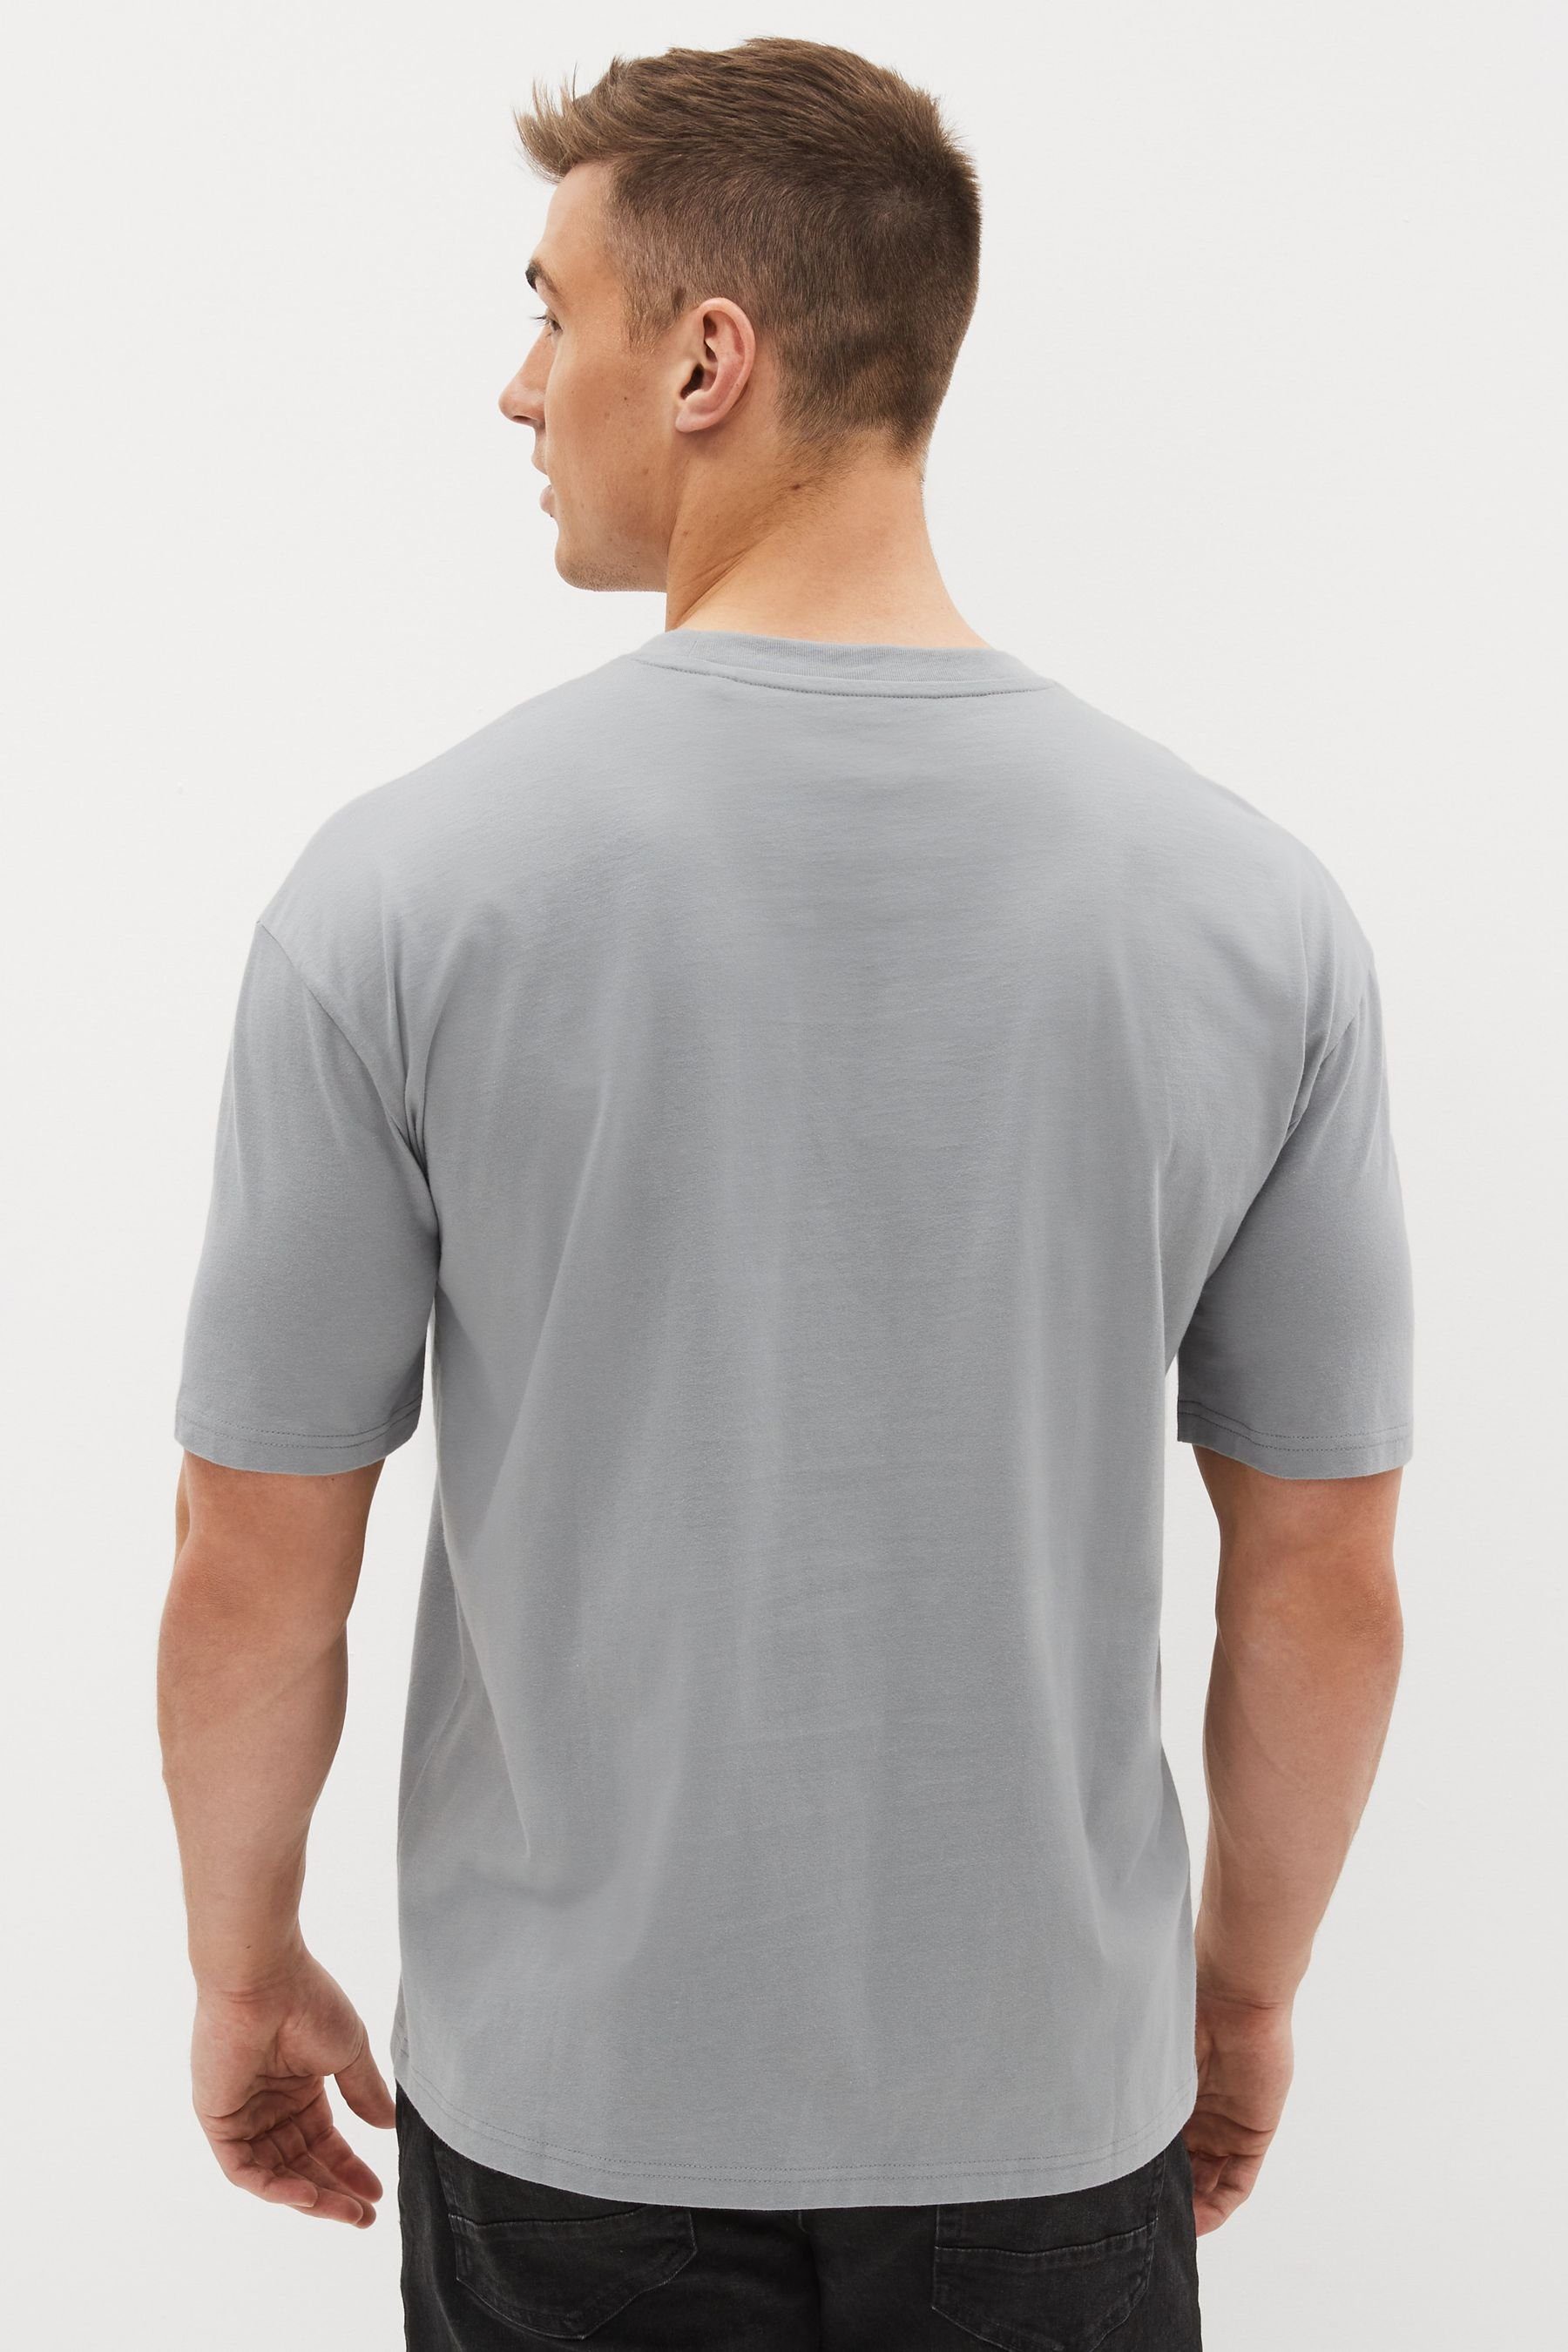 im Grey T-Shirt Fit Next Silver Rundhals-T-Shirt (1-tlg) Relaxed